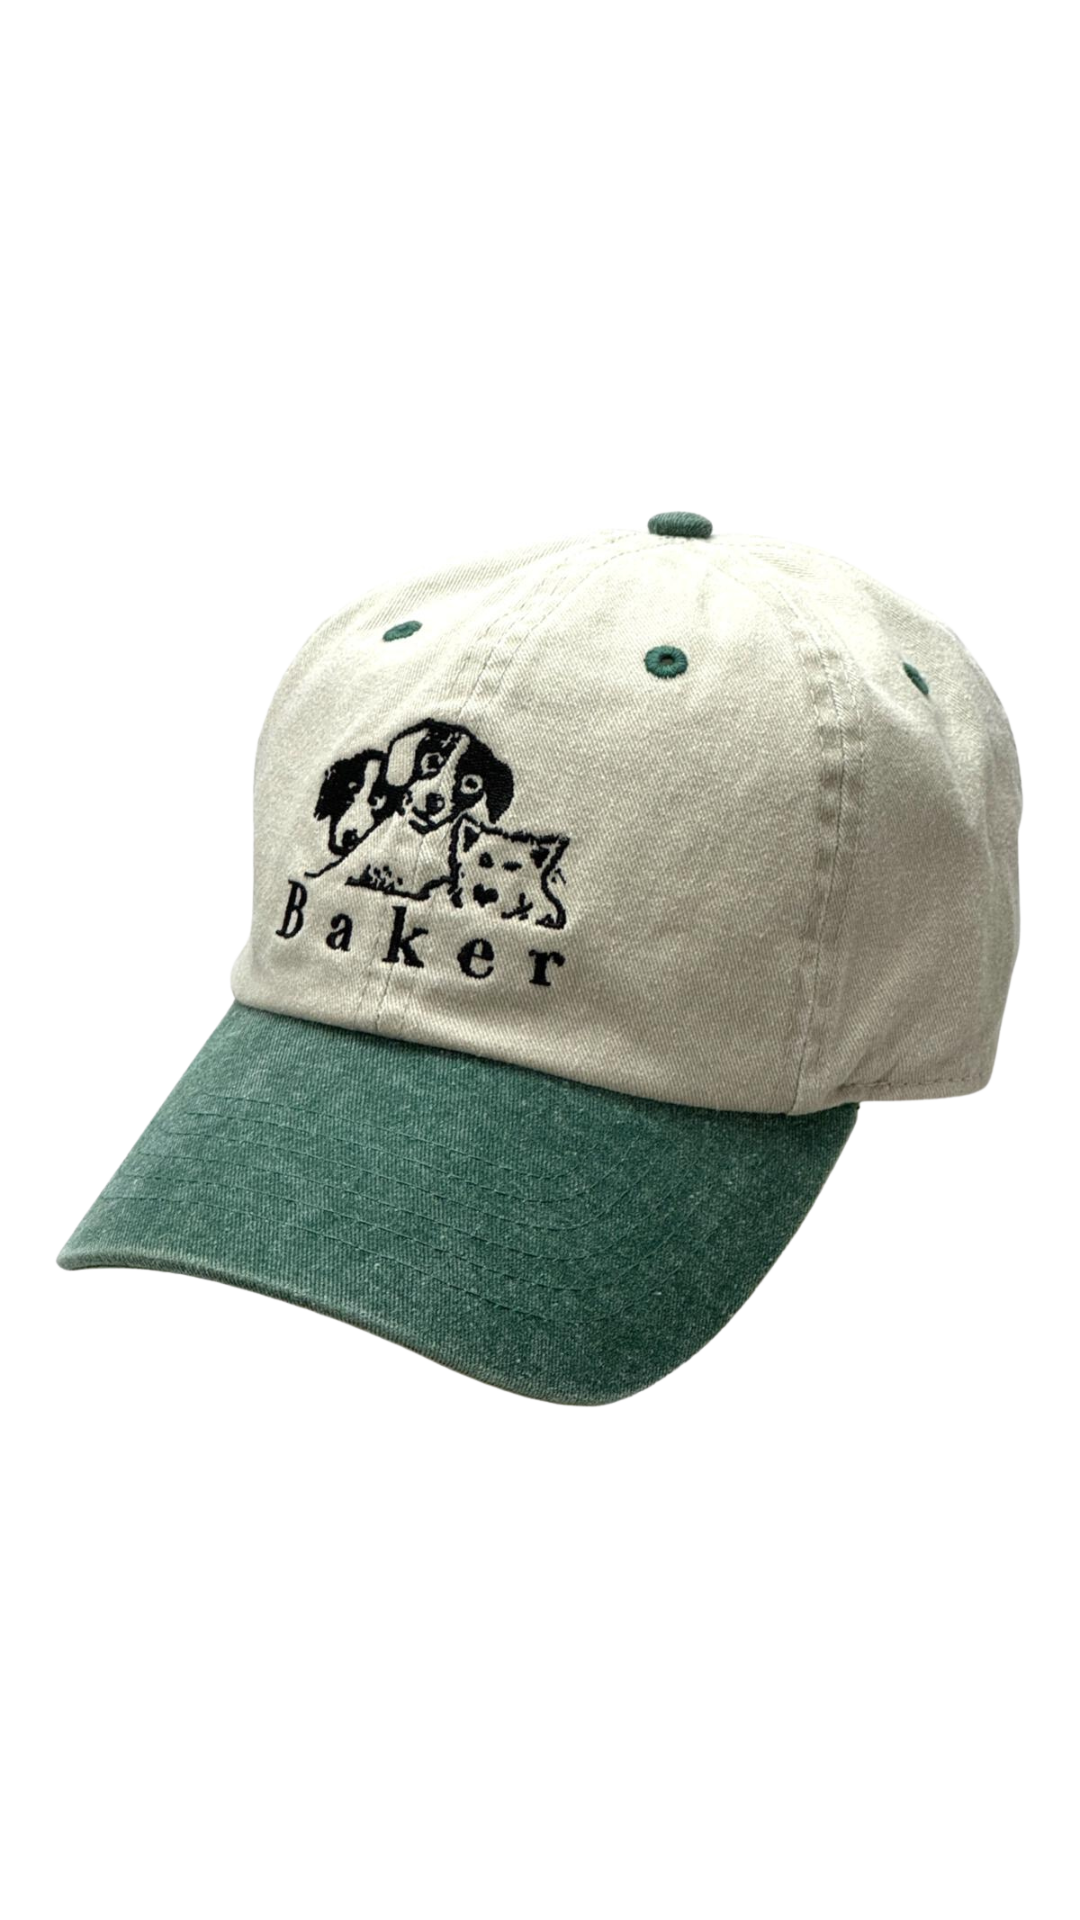 Baker 'Where My Dogs At' Hat